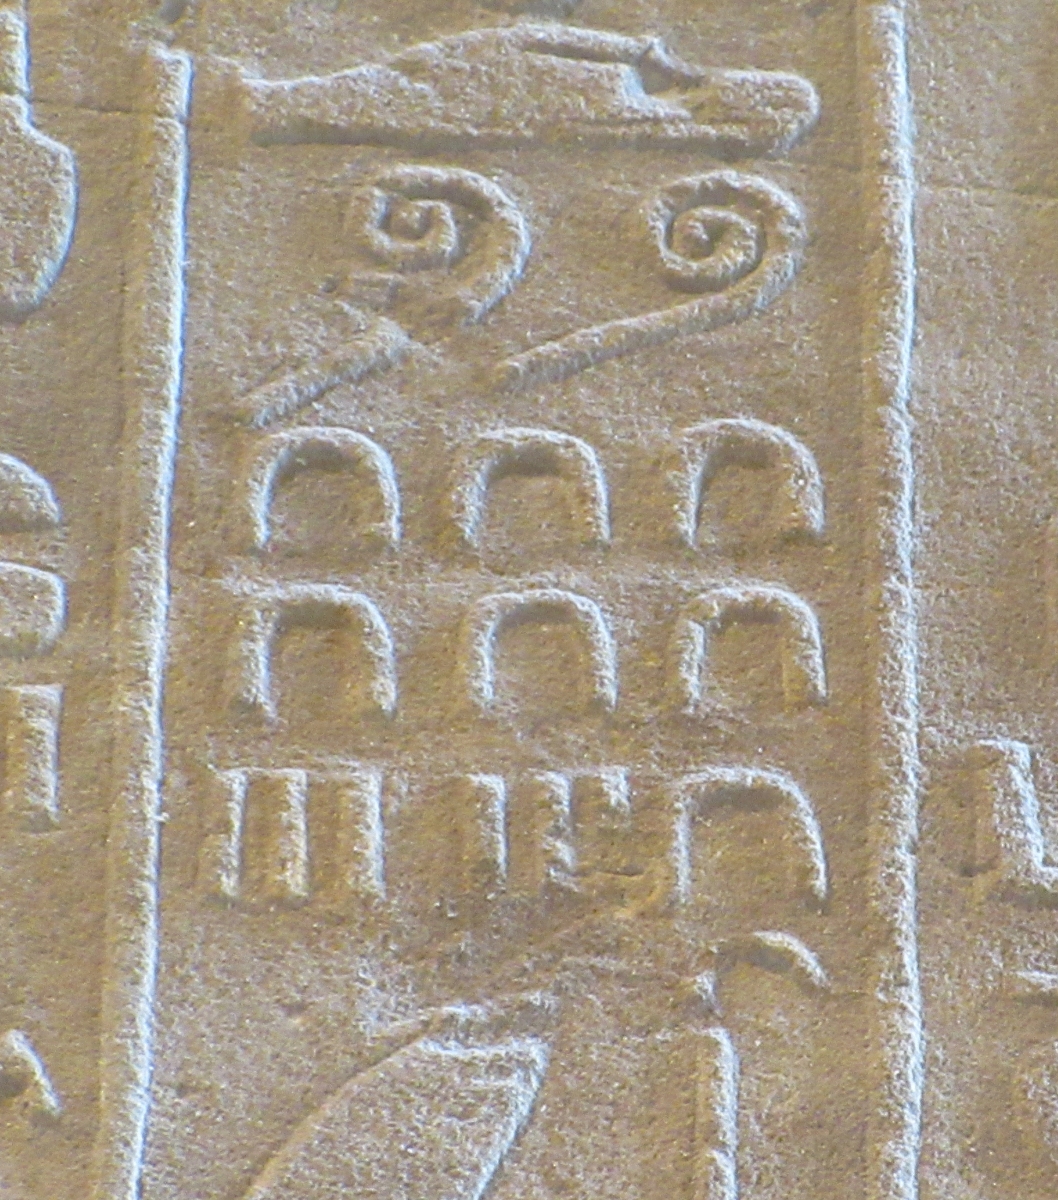 A fifth set of numeral hieroglyphs found on the Annals of Thutmose III.